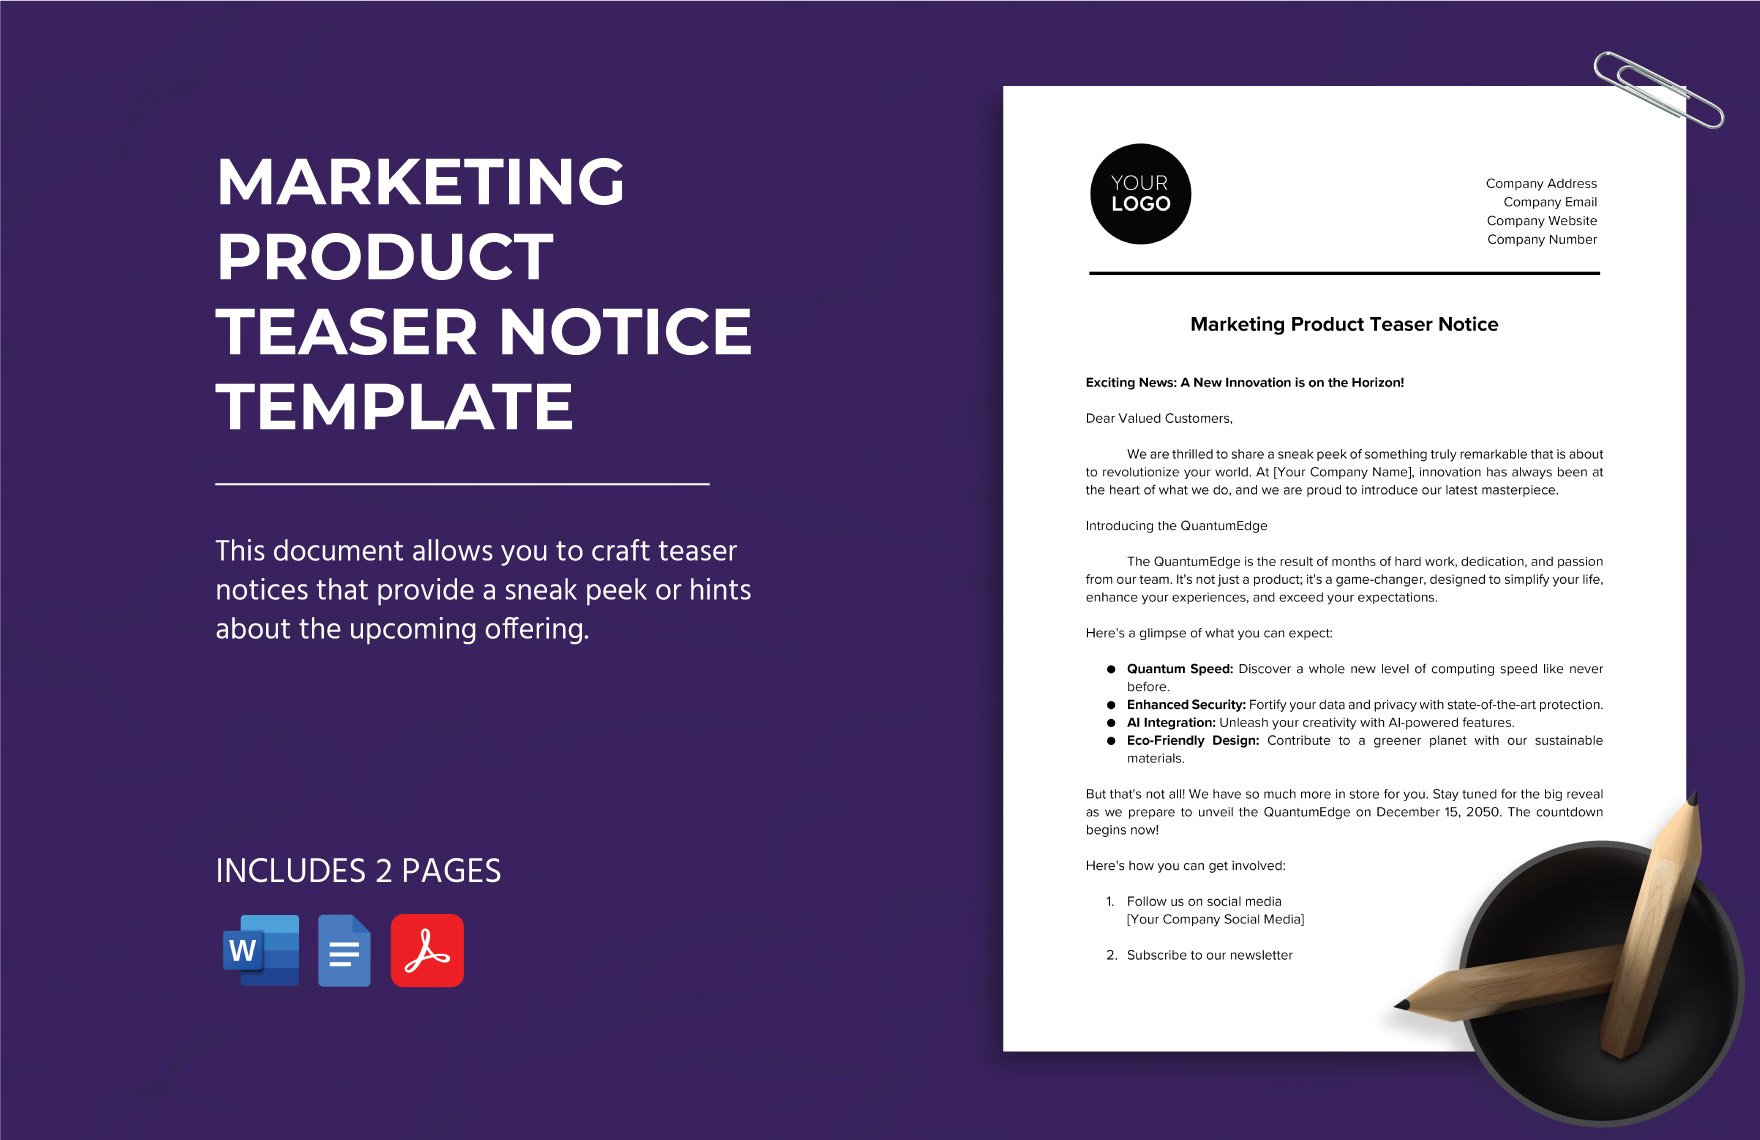 Marketing Product Teaser Notice Template in Word, Google Docs, PDF